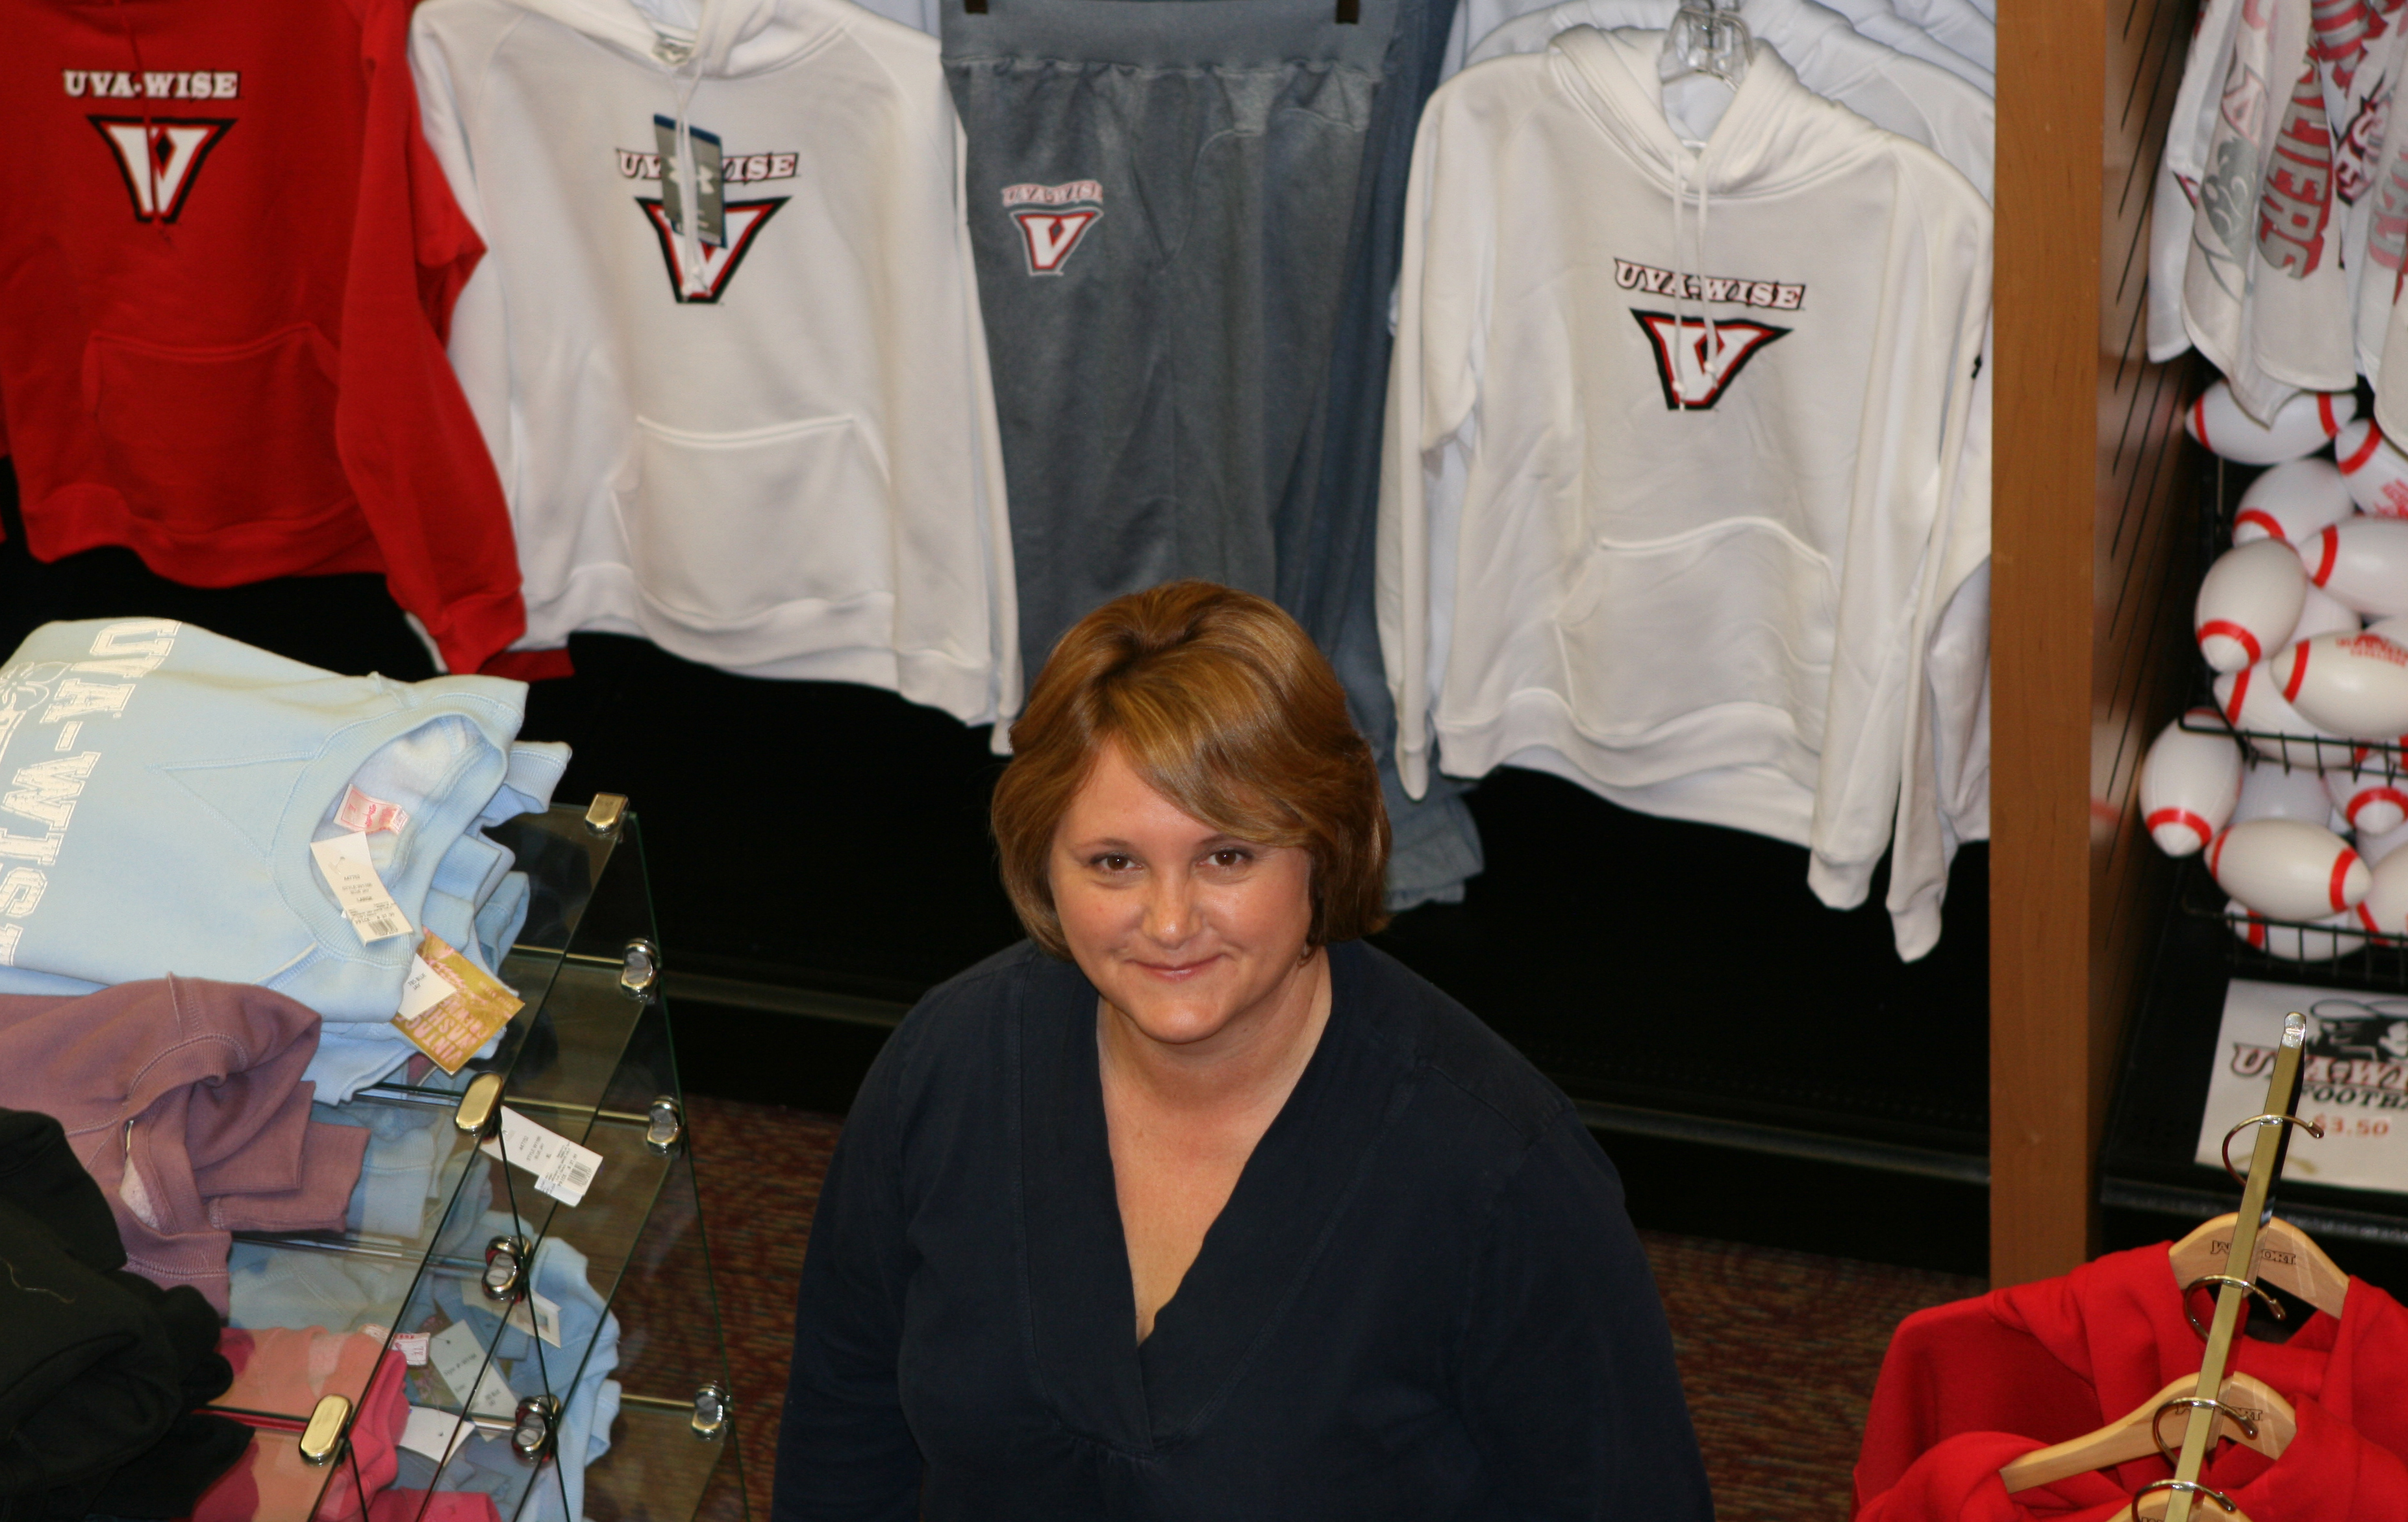 Sheila Hileman standing in a store with UVA wise clothing